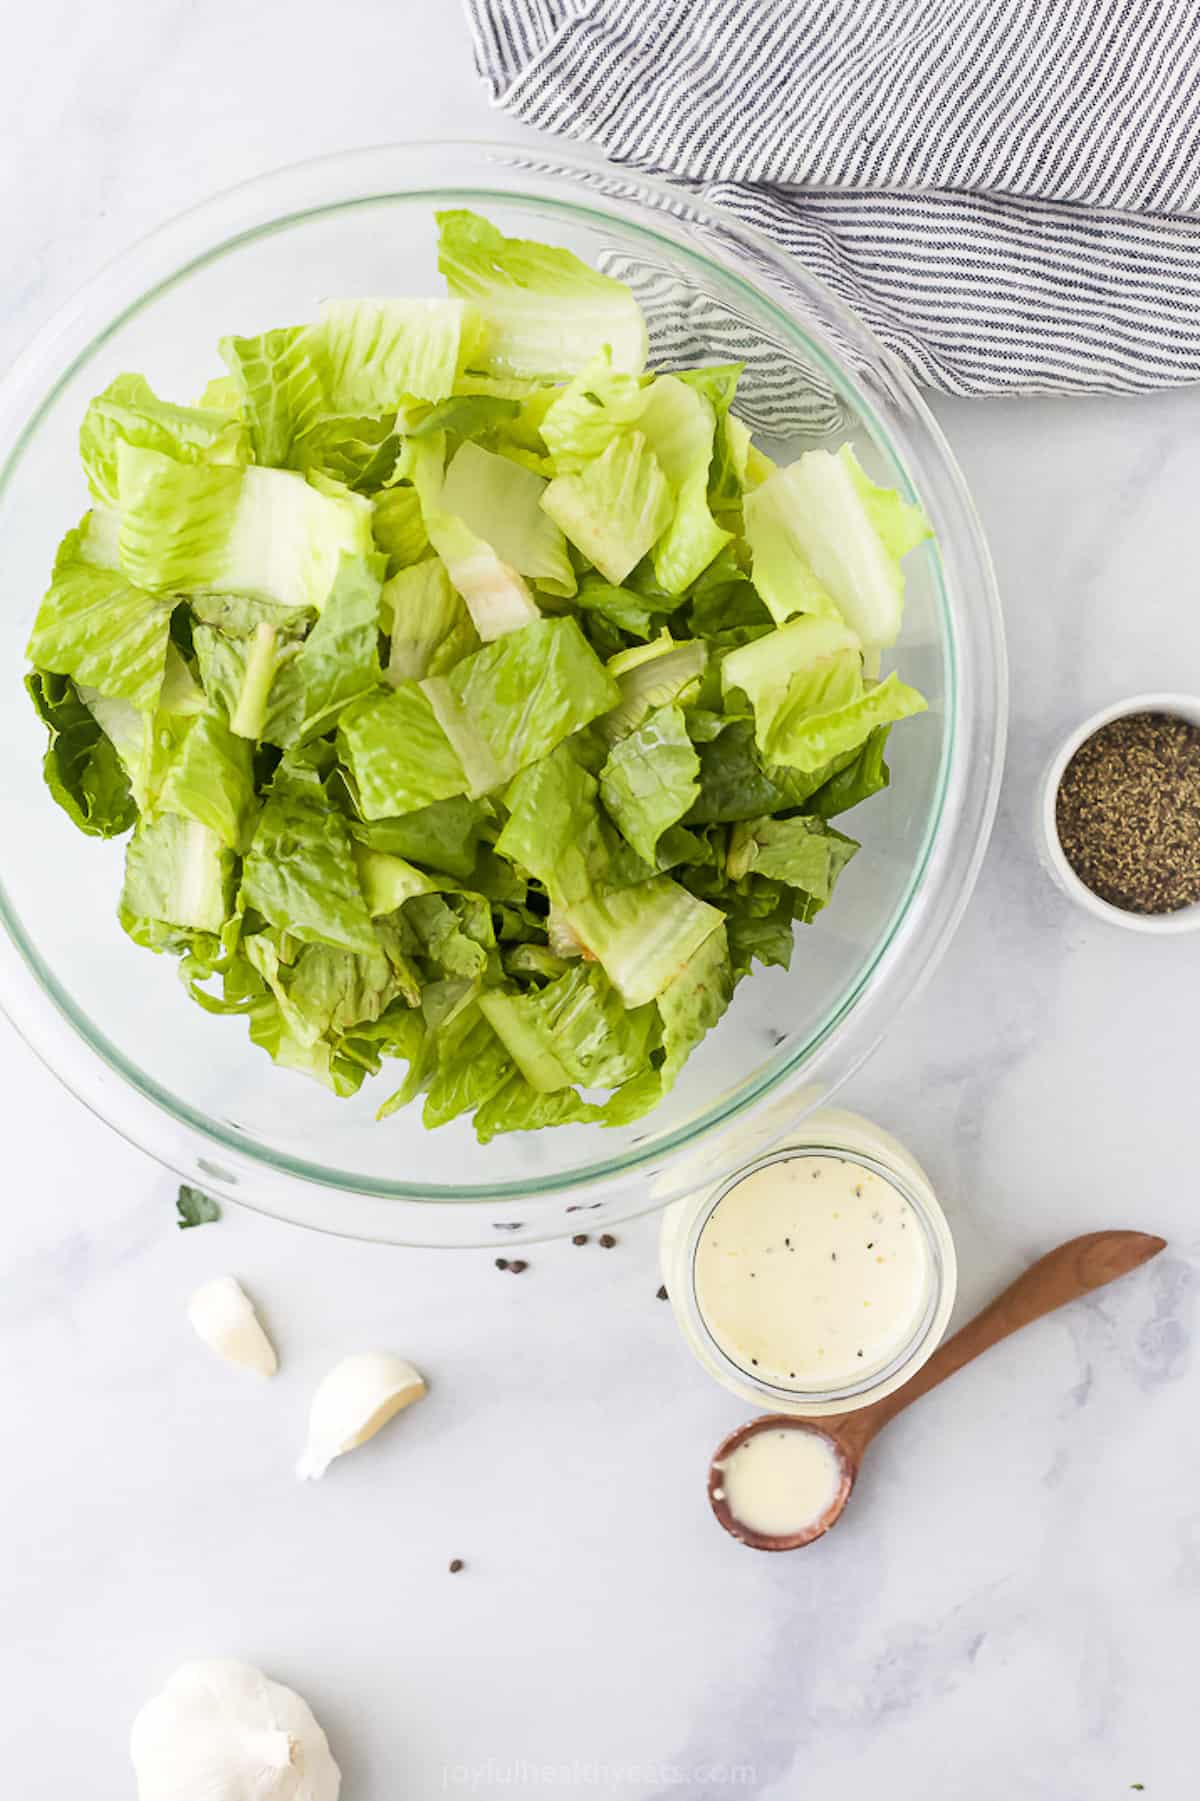 Chopped lettuce in a mixing bowl beside a jar of homemade dressing